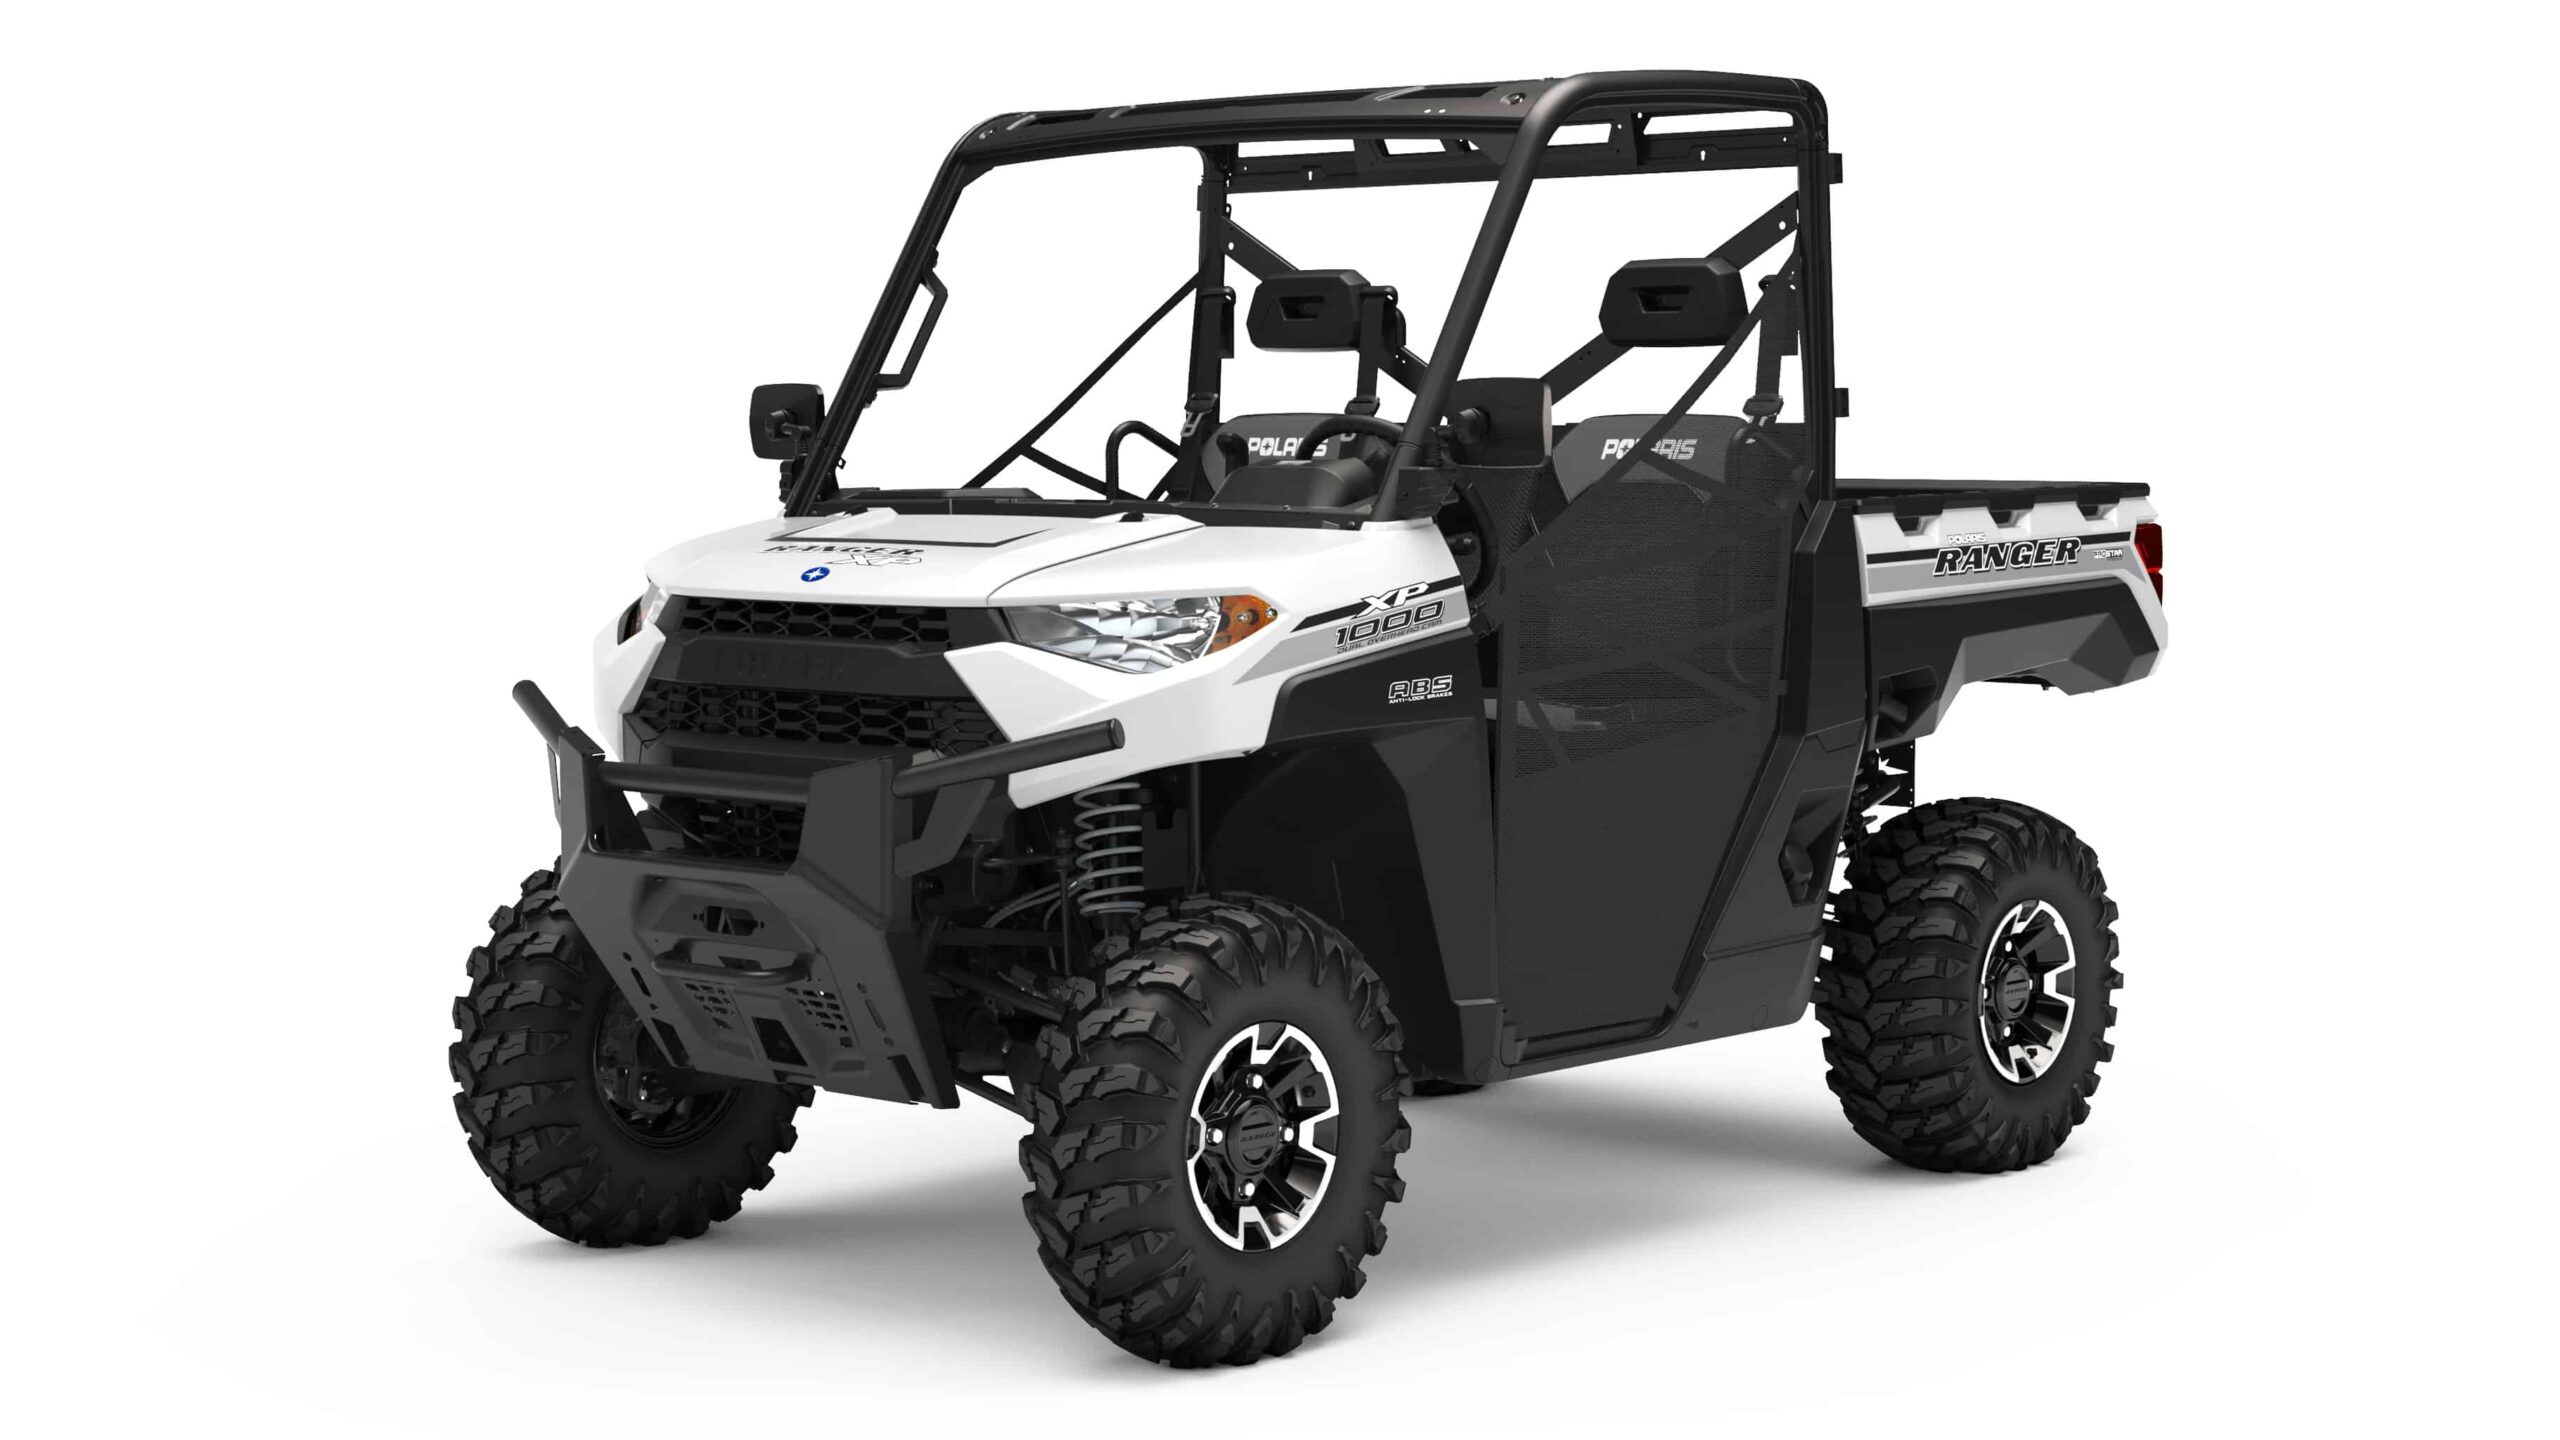 All-new Ranger XP 1000 EPS with ABS